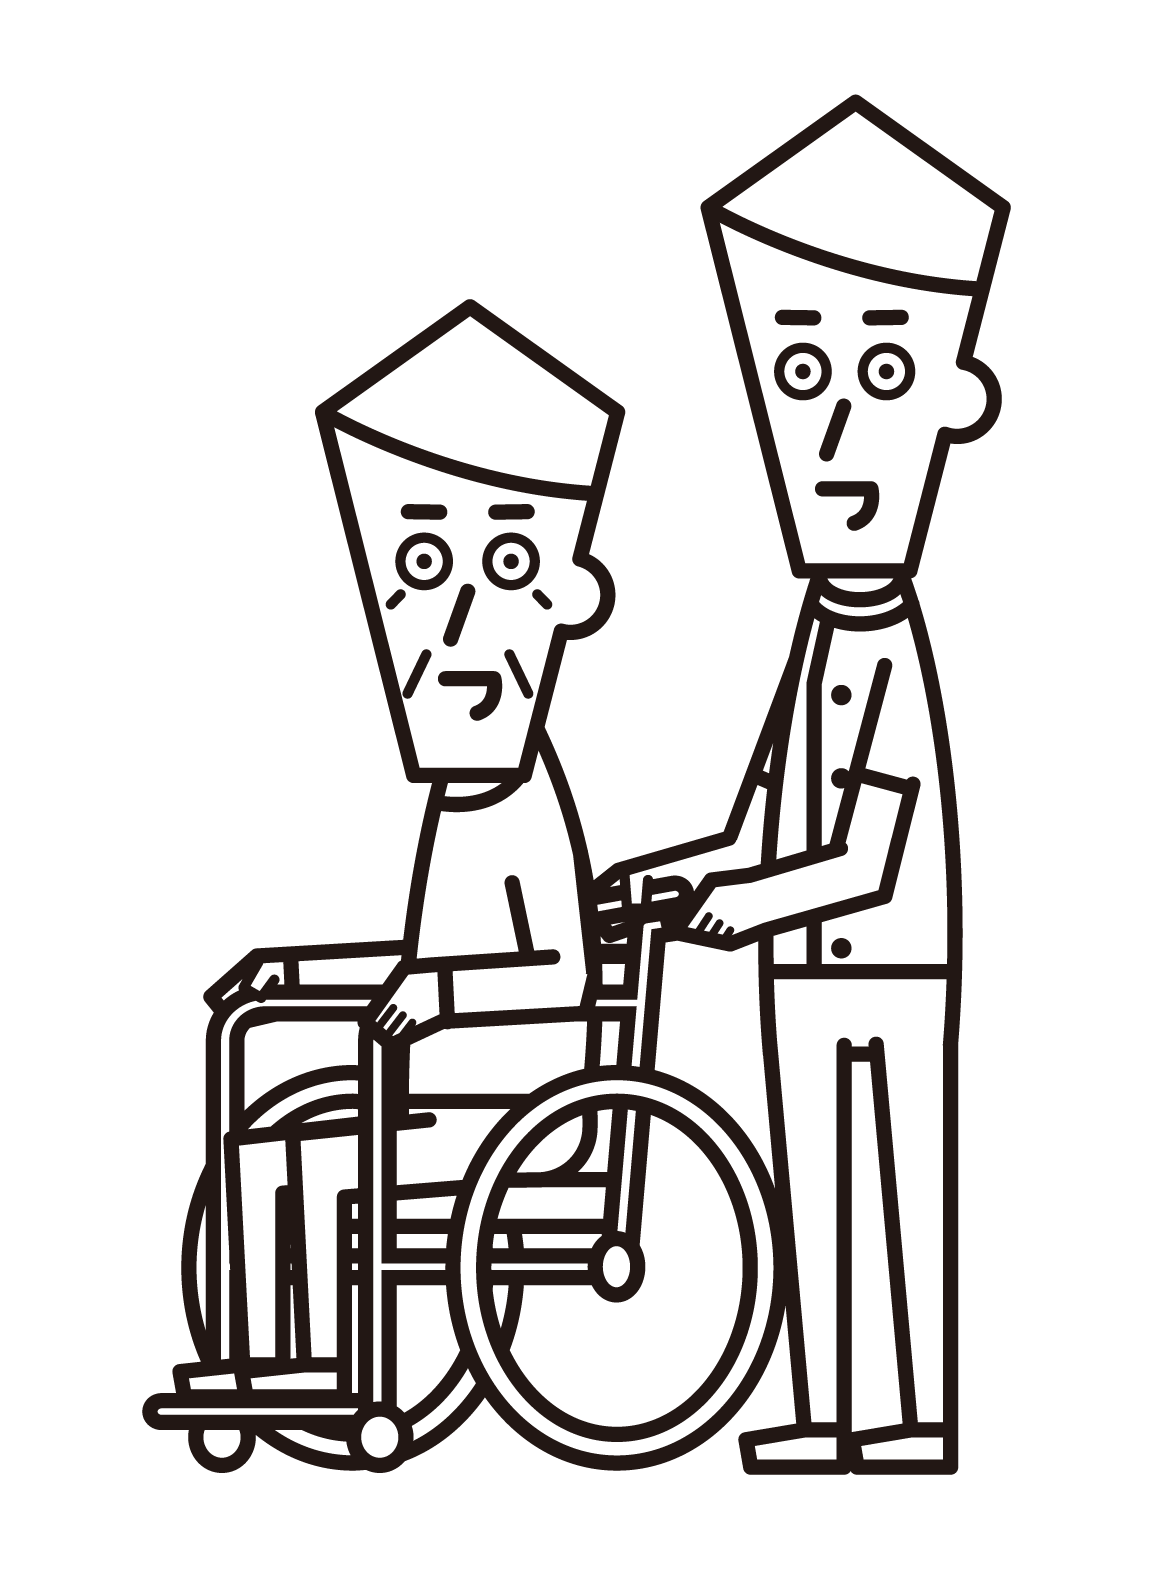 Illustration of a care worker (male) pushing a wheelchair